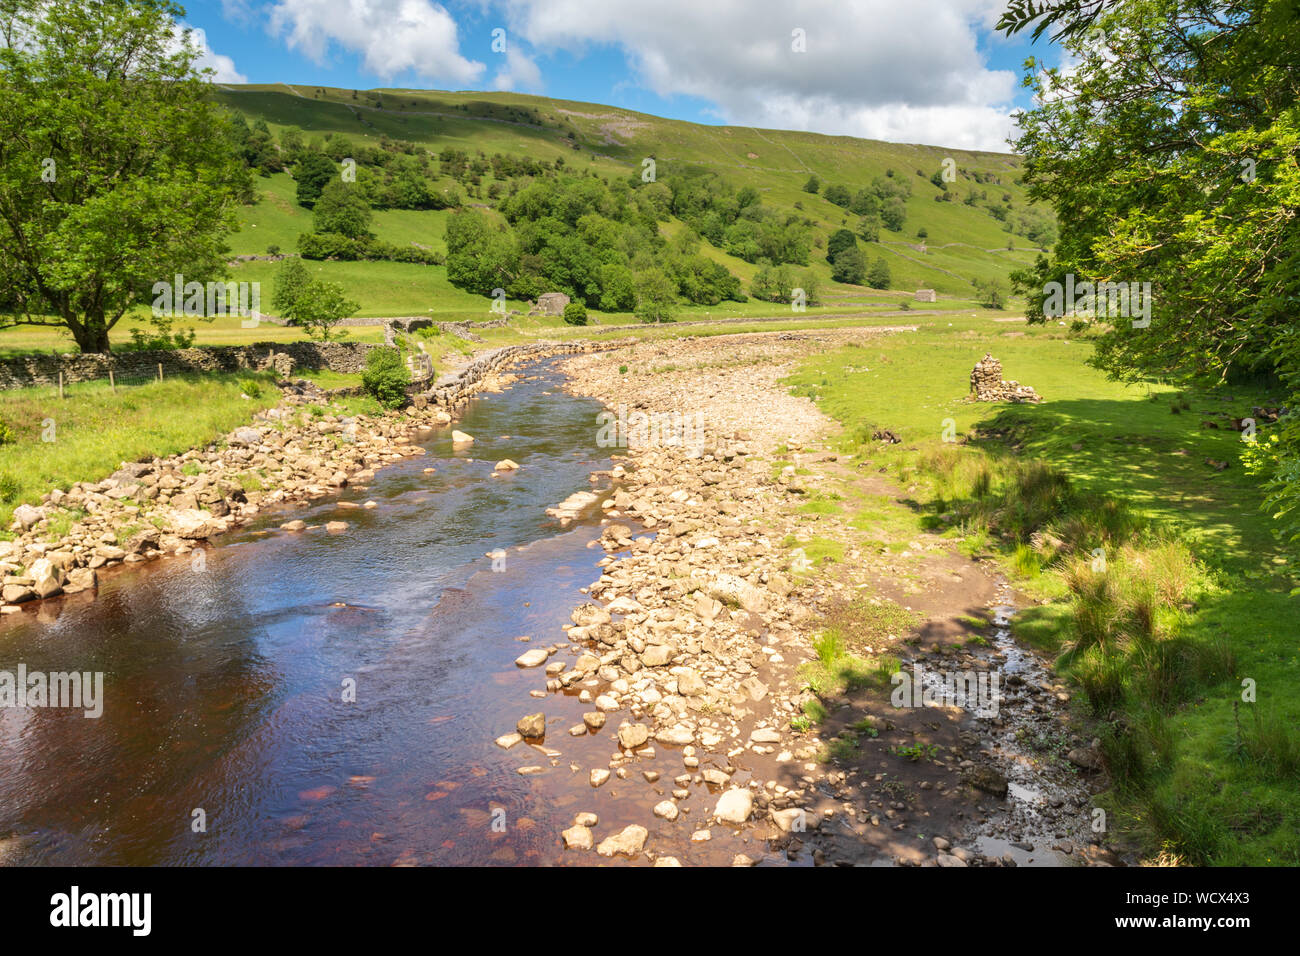 River Swale in Upper Swaledale from Rampsholm bridge looking towards the footpath to Keld and Kisdon Hill. Stock Photo